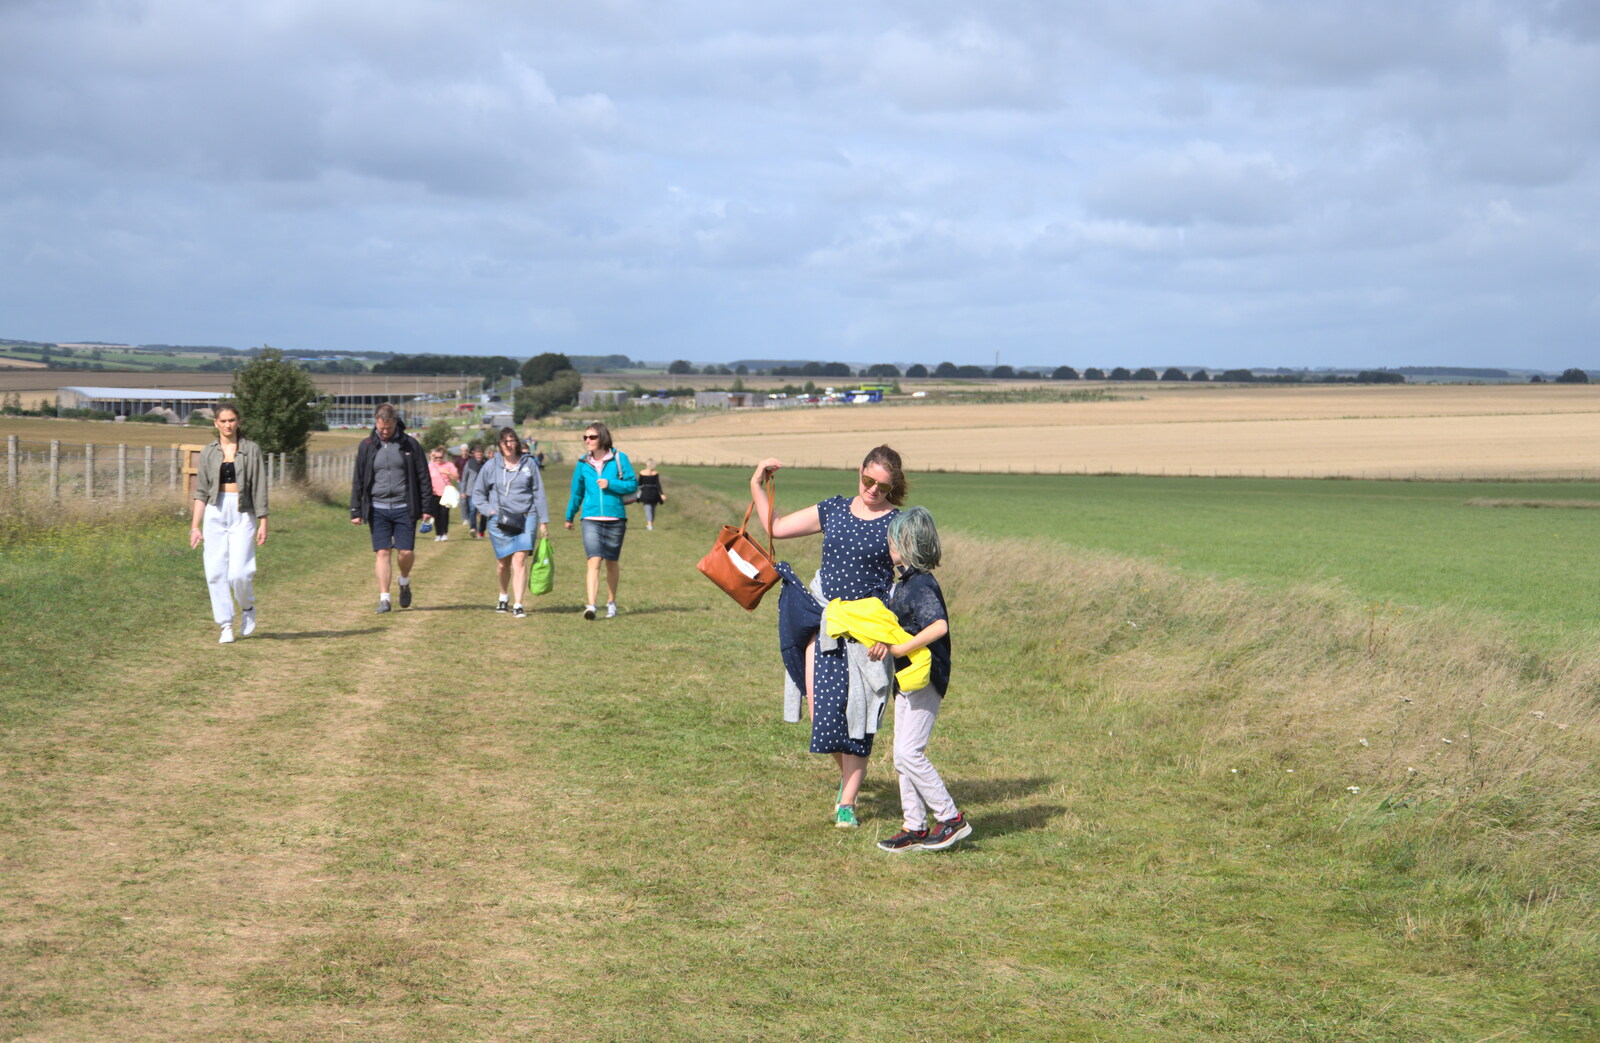 Walking is encouraged instead of getting the bus from Stone Circles: Stonehenge and Avebury, Wiltshire - 22nd August 2020